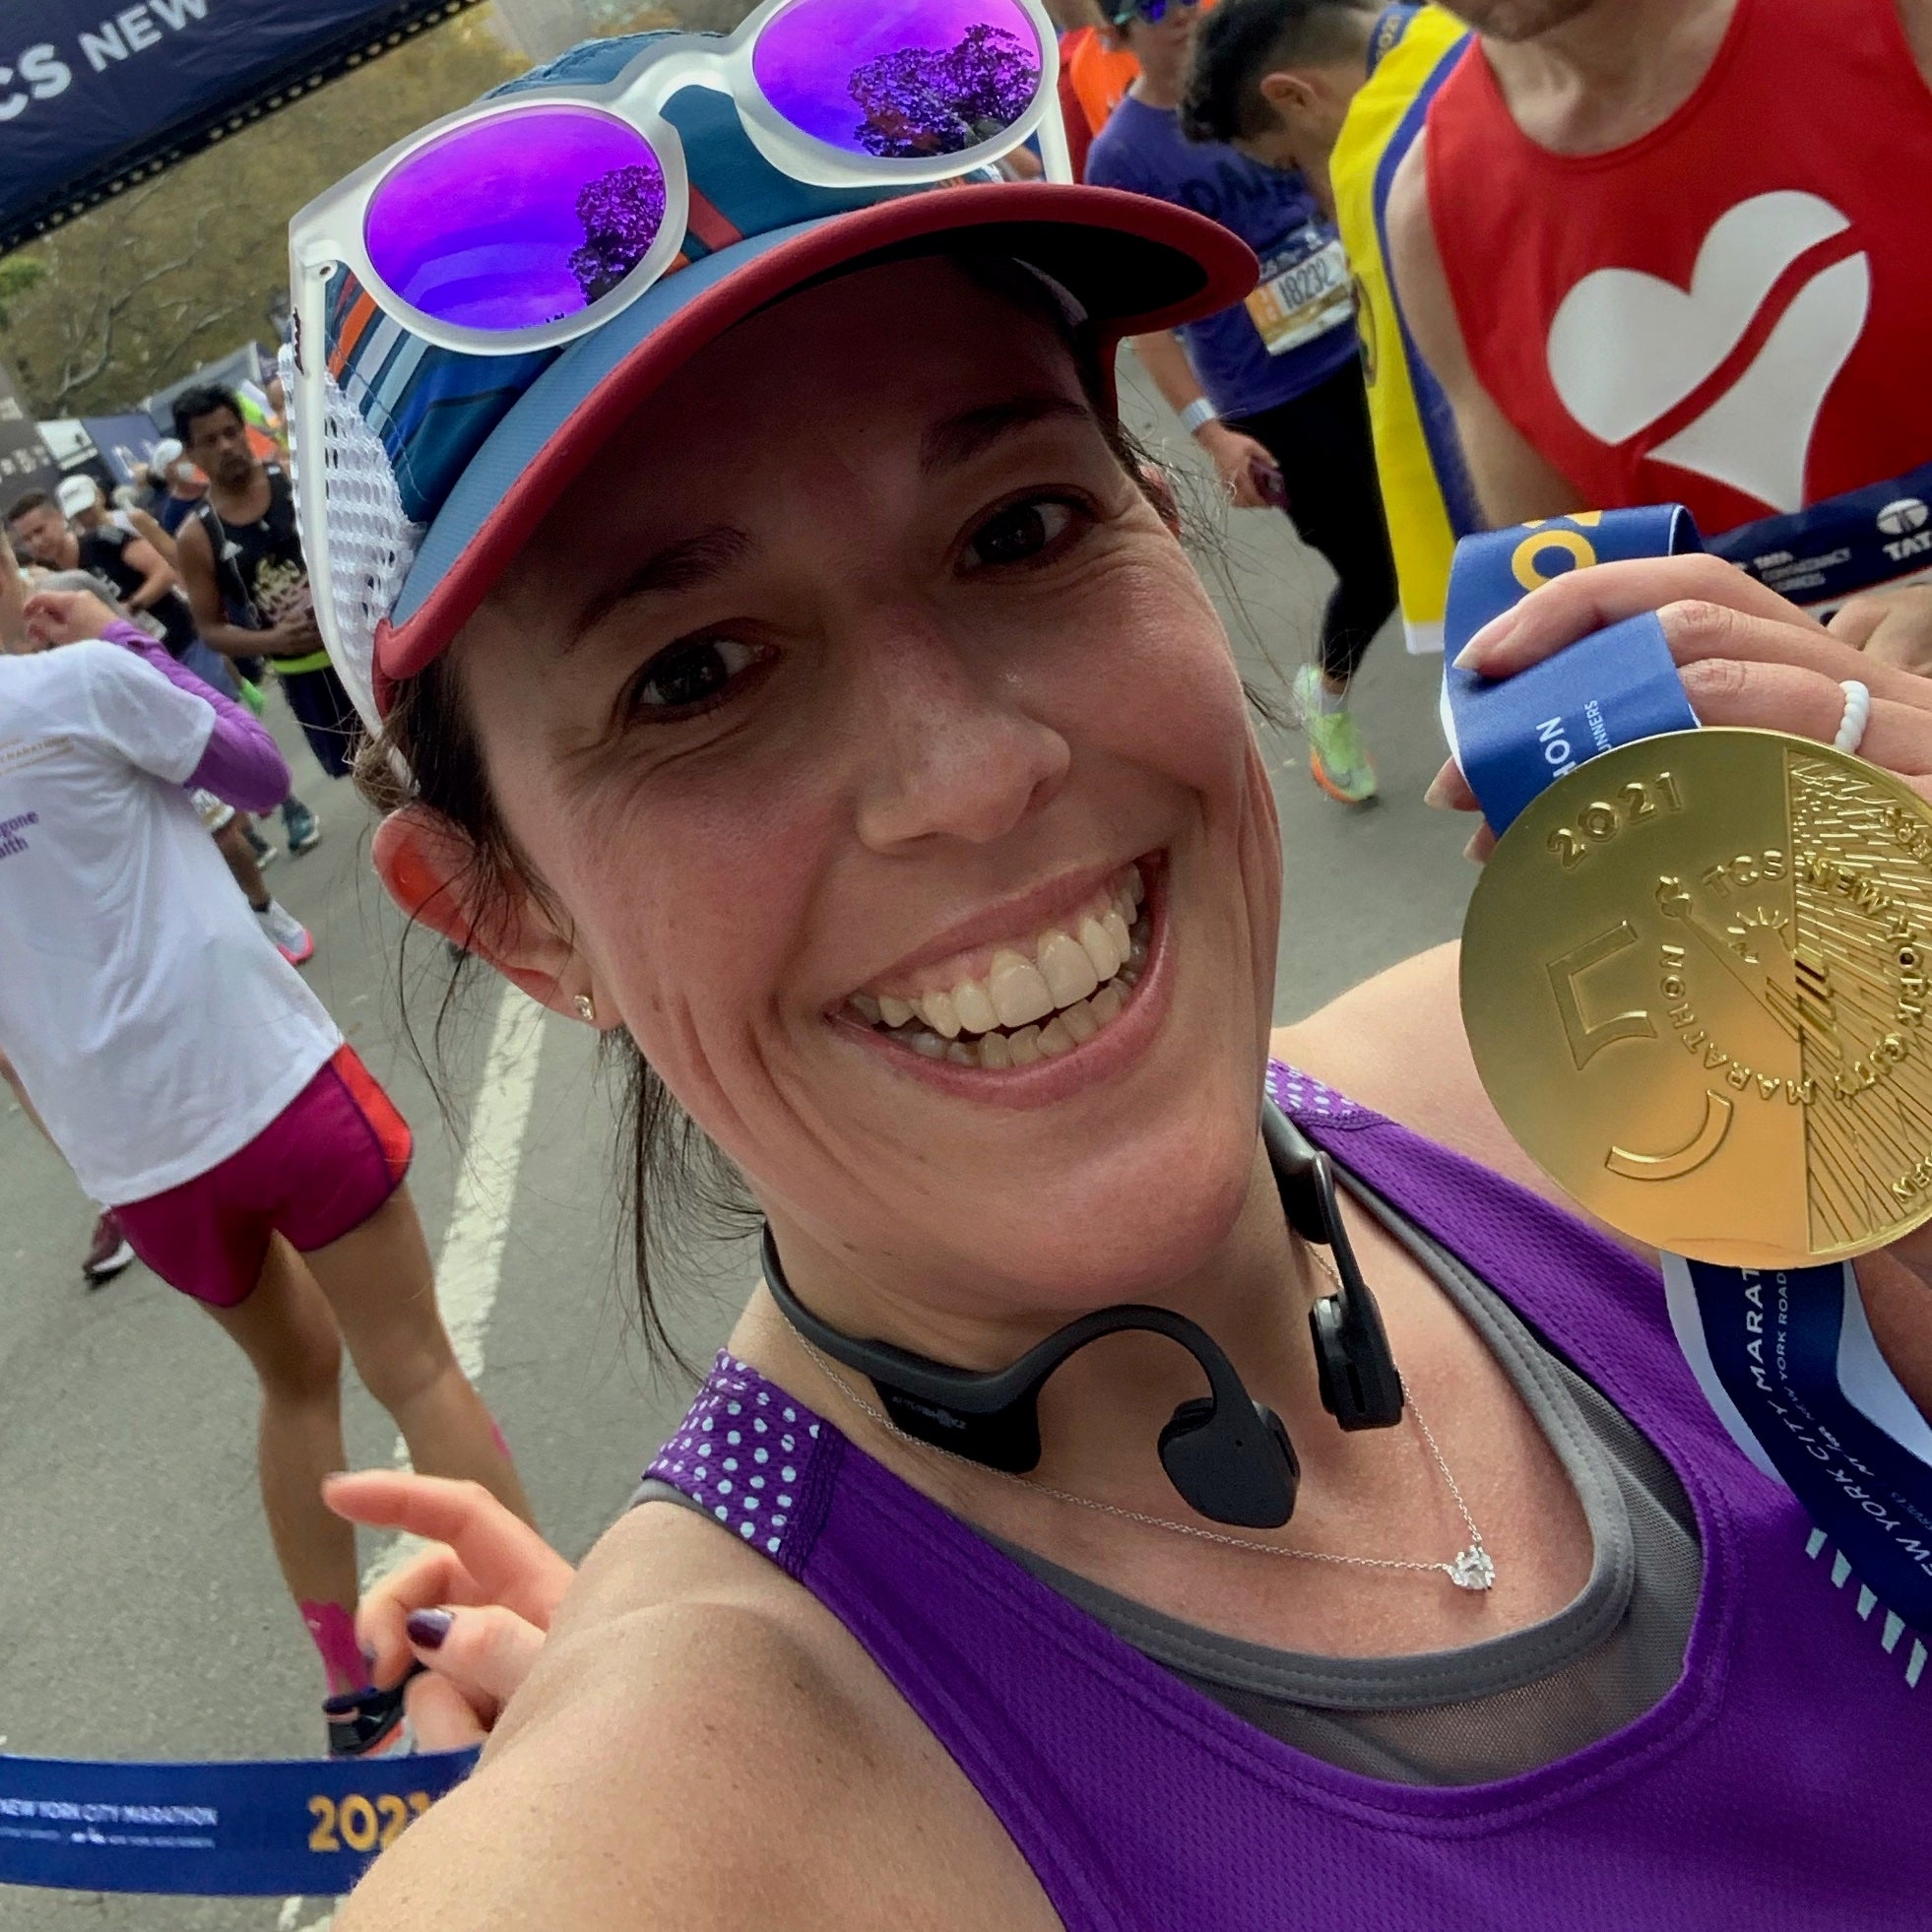 RADJournals: Kelly Blavatt’s first marathon was alone looping in her neighborhood during COVID. Her second was the NYC Marathon. Two opposite experiences recapped.